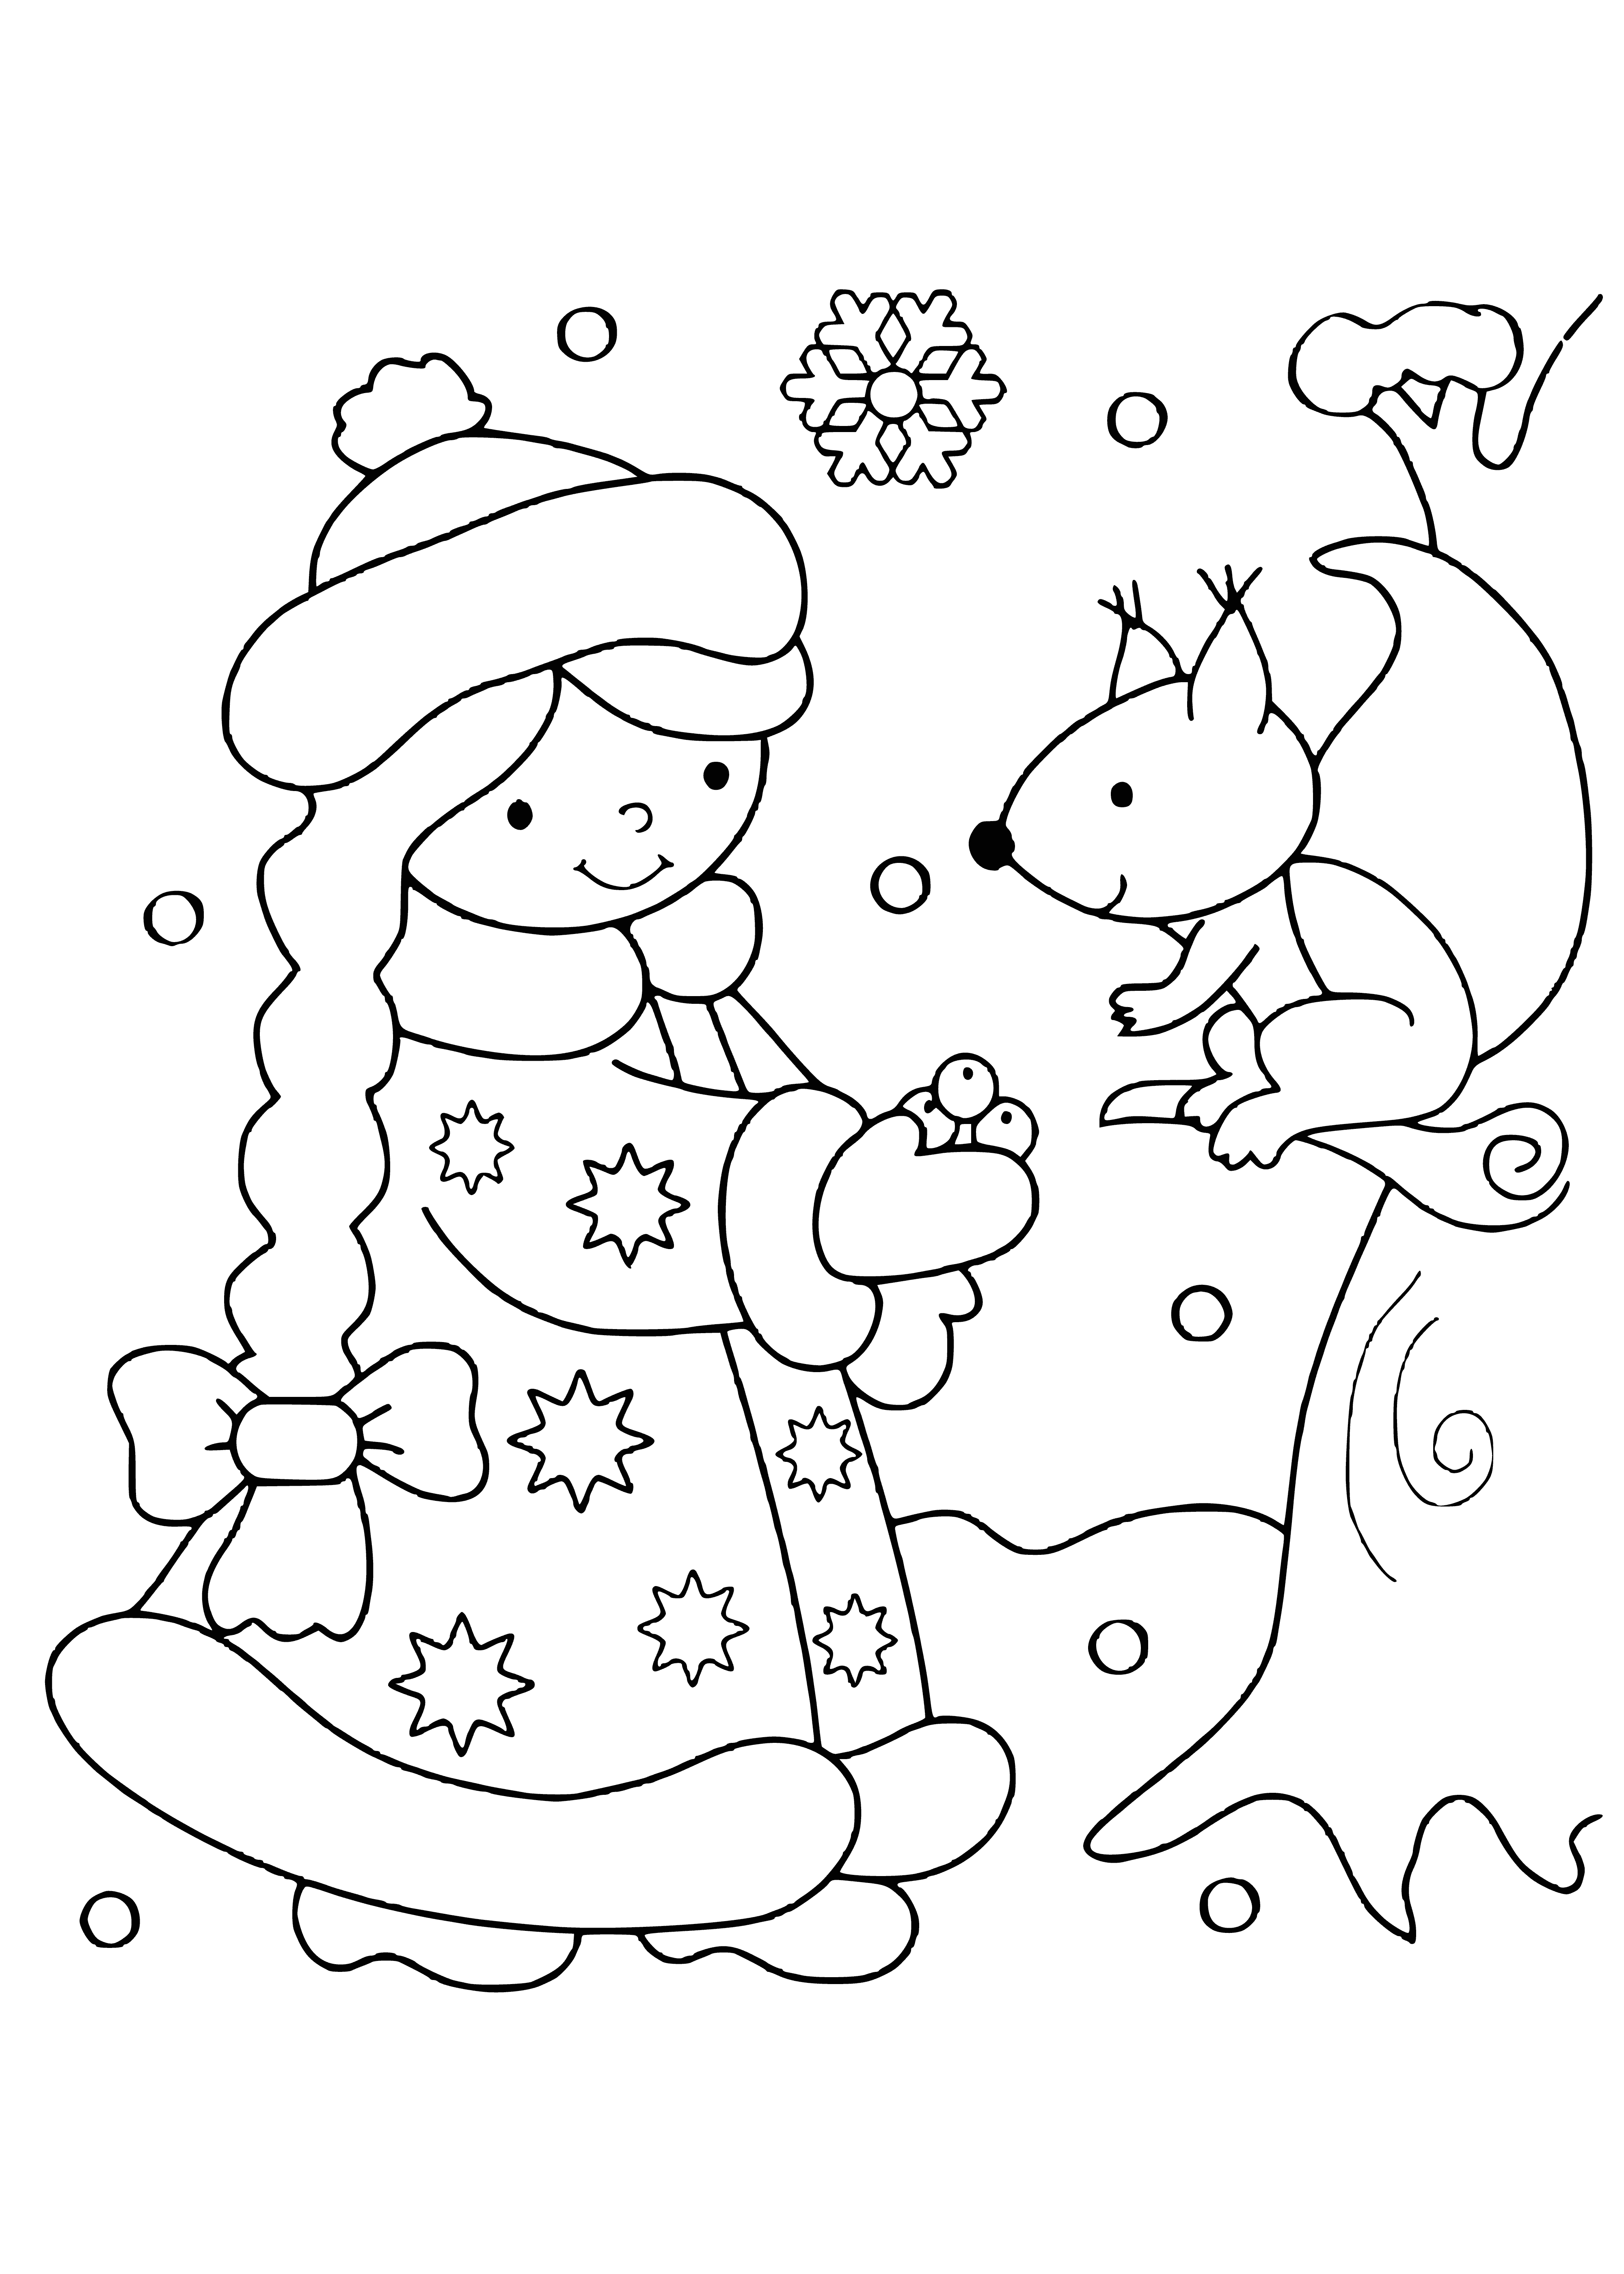 coloring page: Girl in red/white Russian folk dress enjoys winter in forest, catching snowflakes in sheet of fabric with eyes closed and gentle smile.